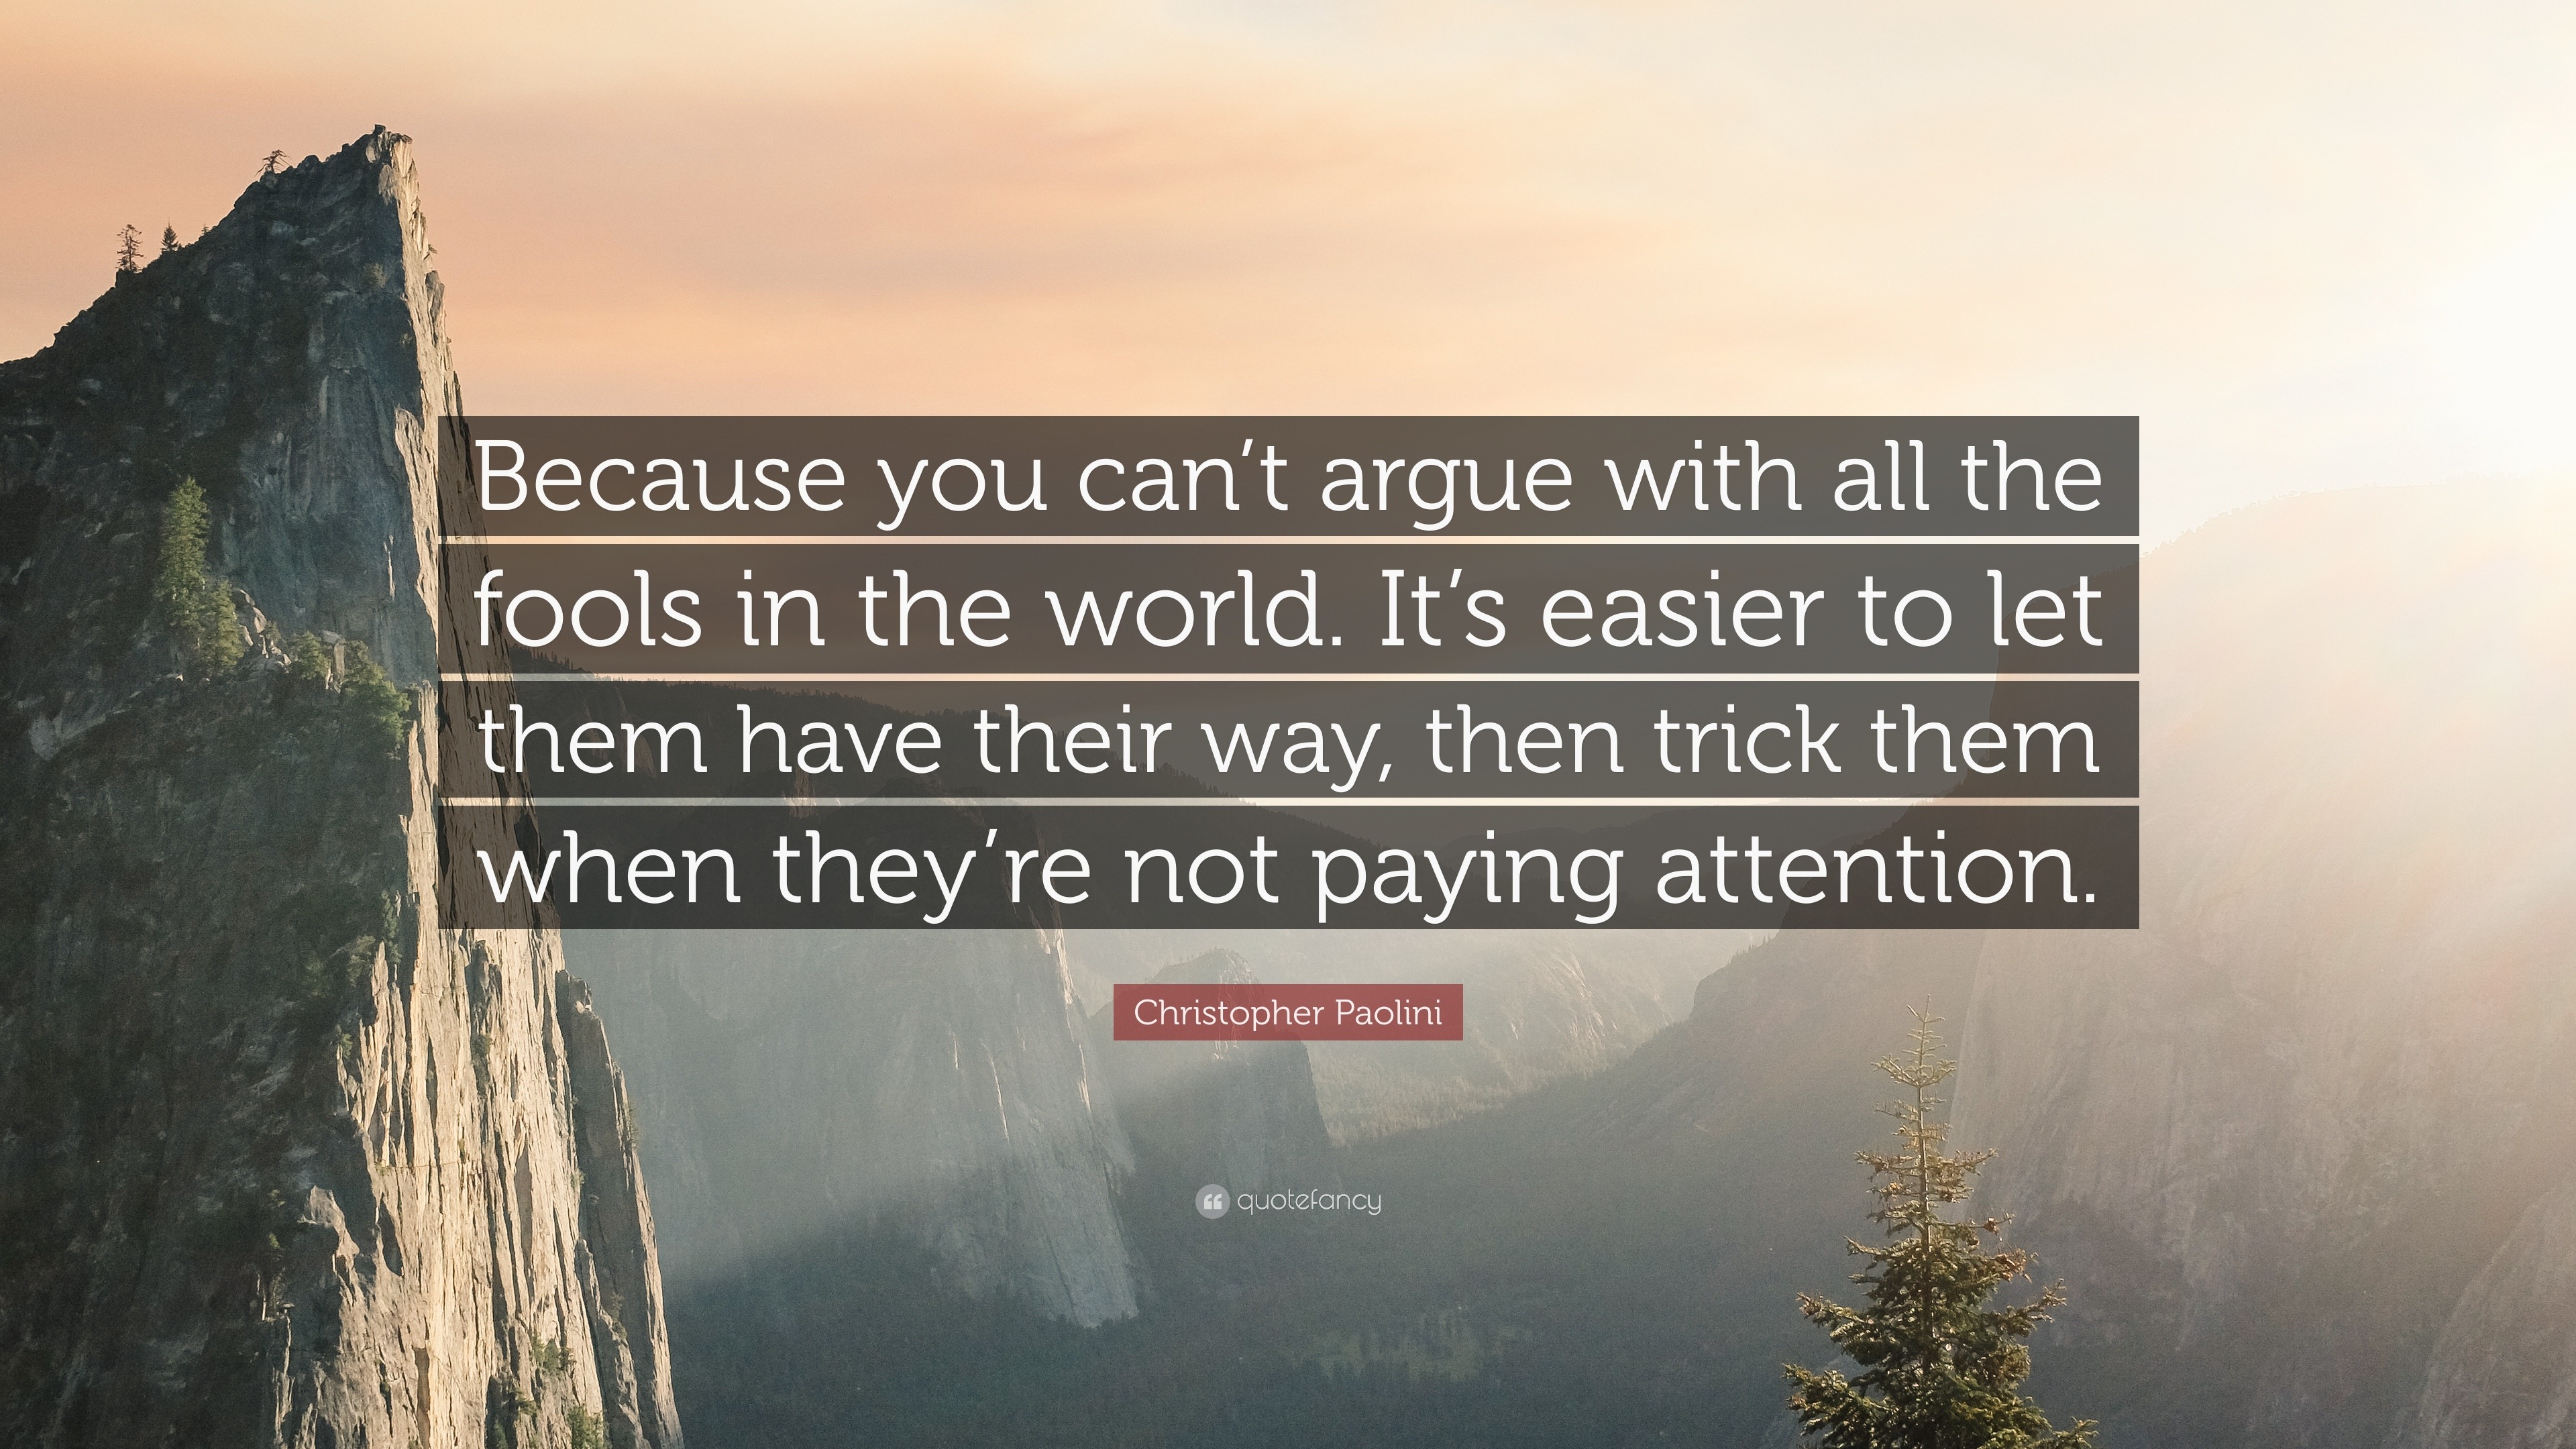 Christopher Paolini Quote: “Because you can’t argue with all the fools ...